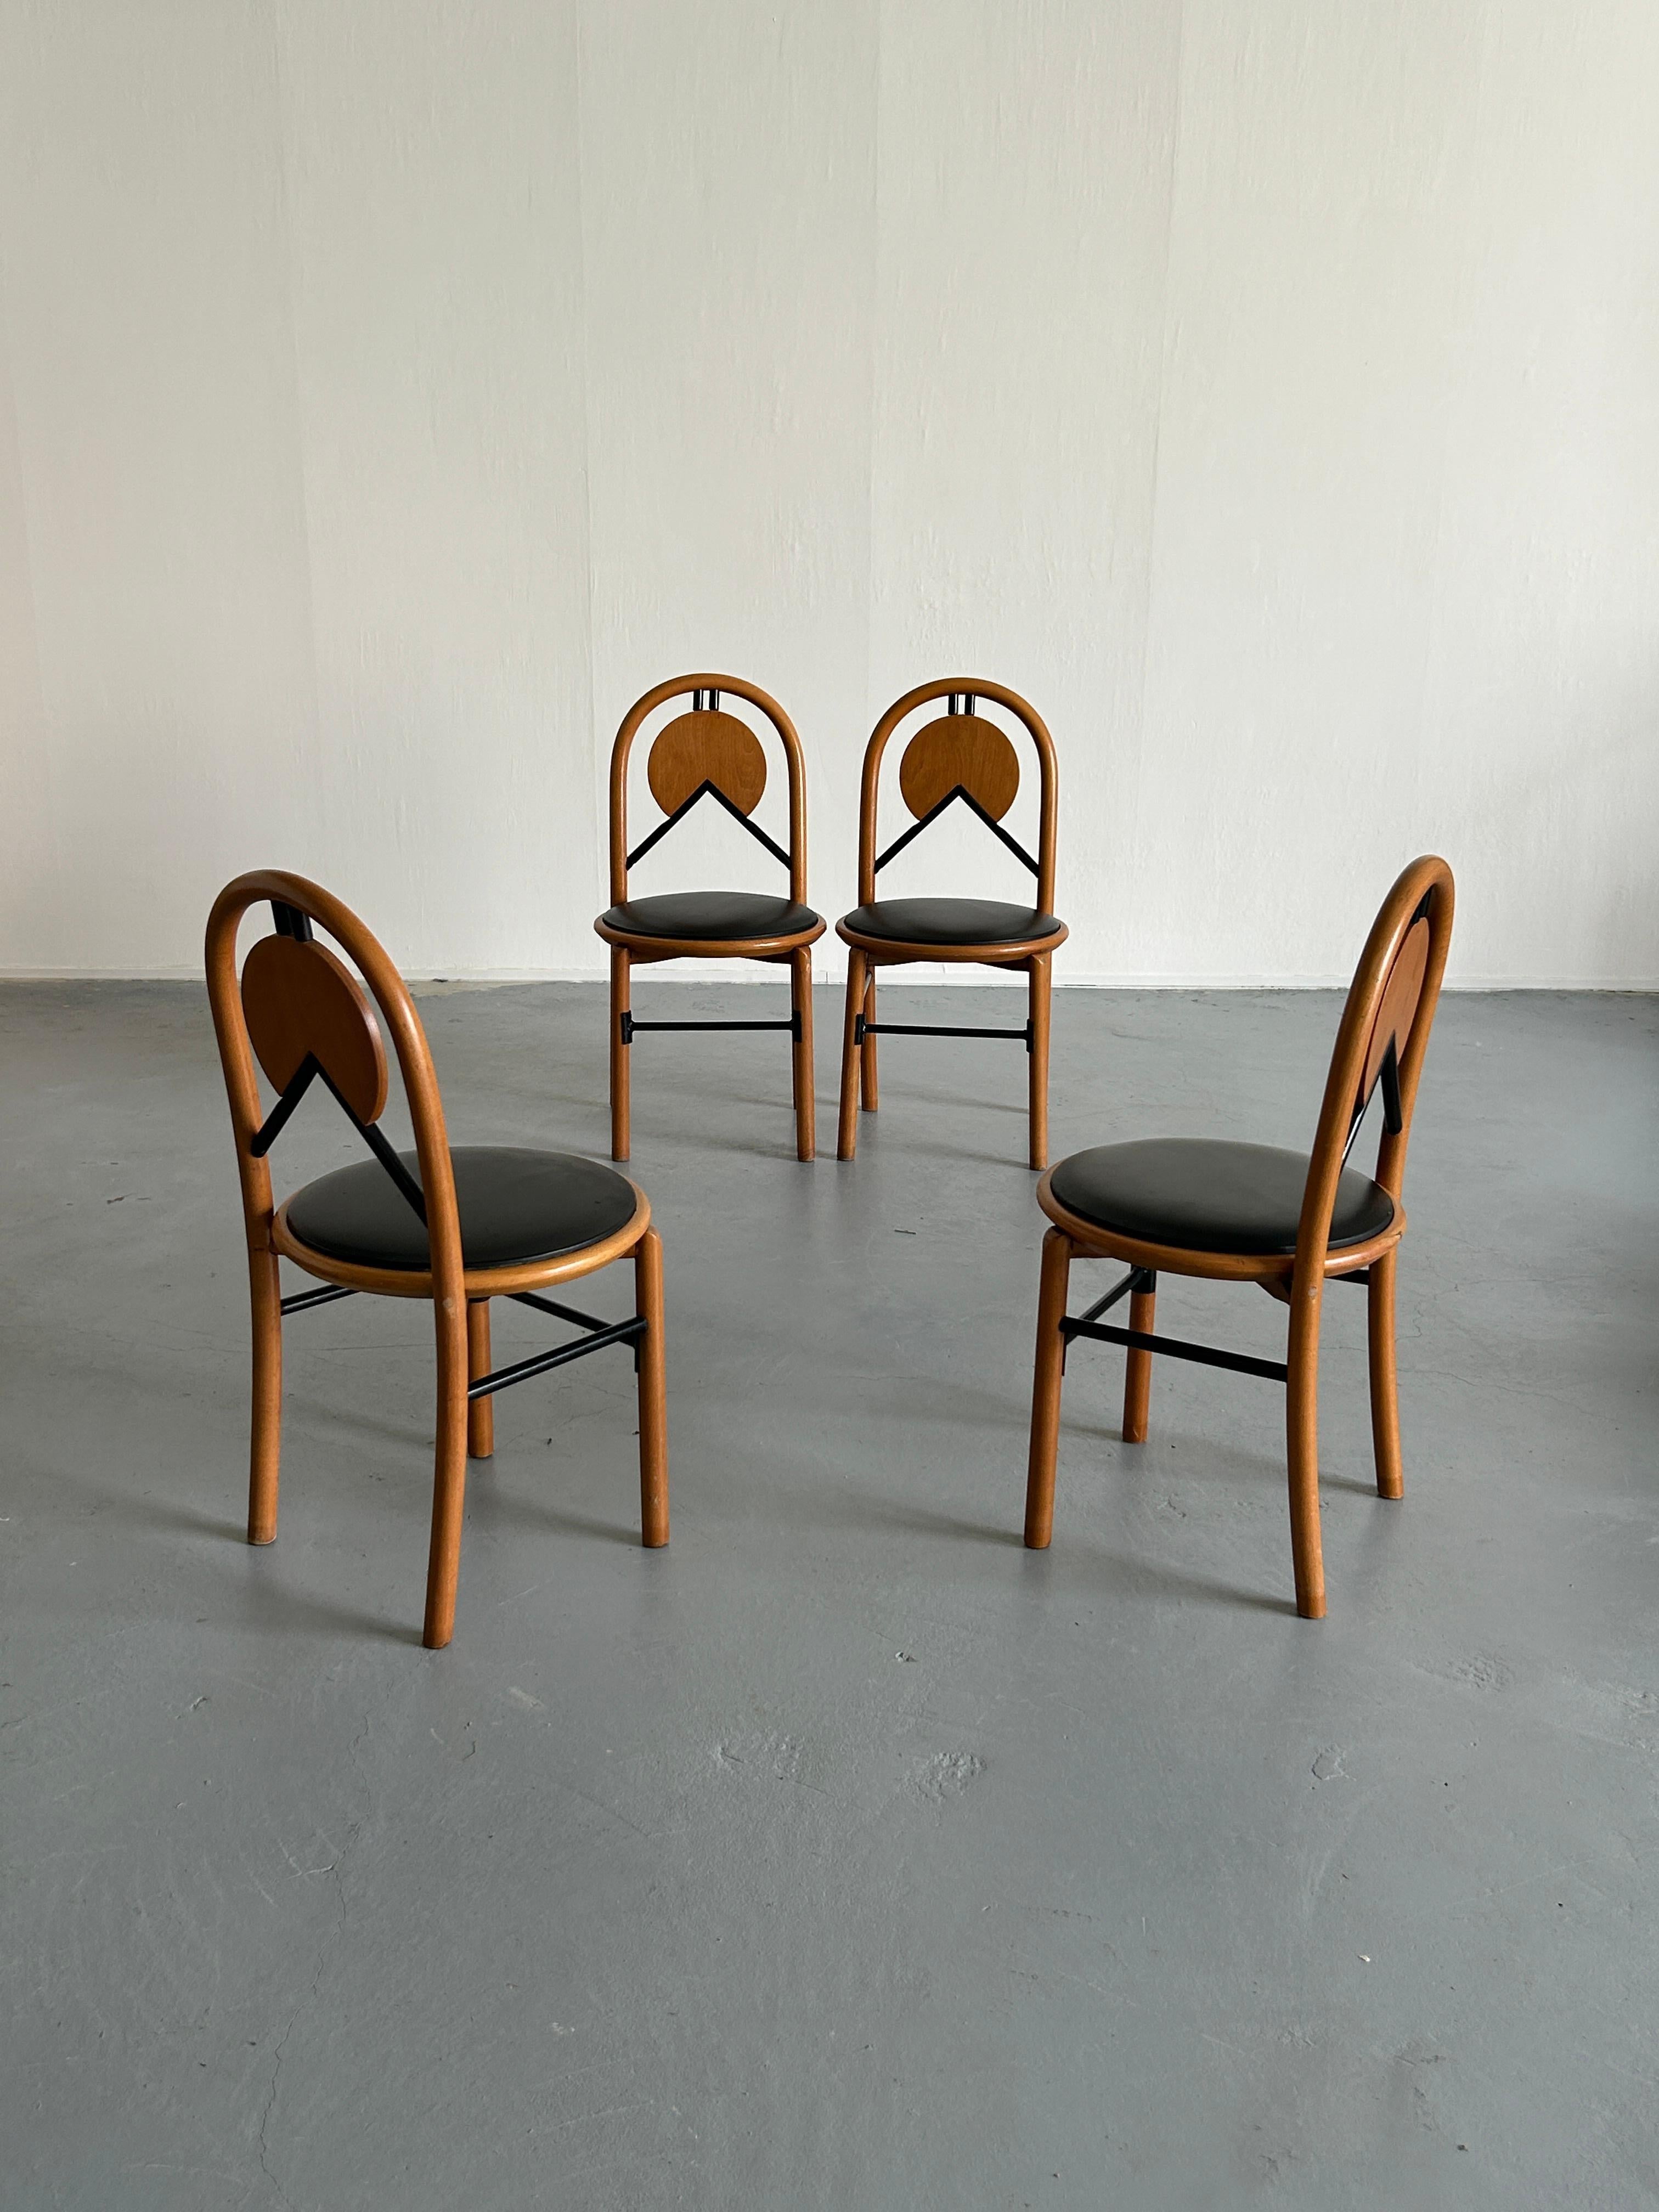 Post-Modern Set of 4 Vintage Italian Postmodern Sculptural Chairs in the Style of Memphis